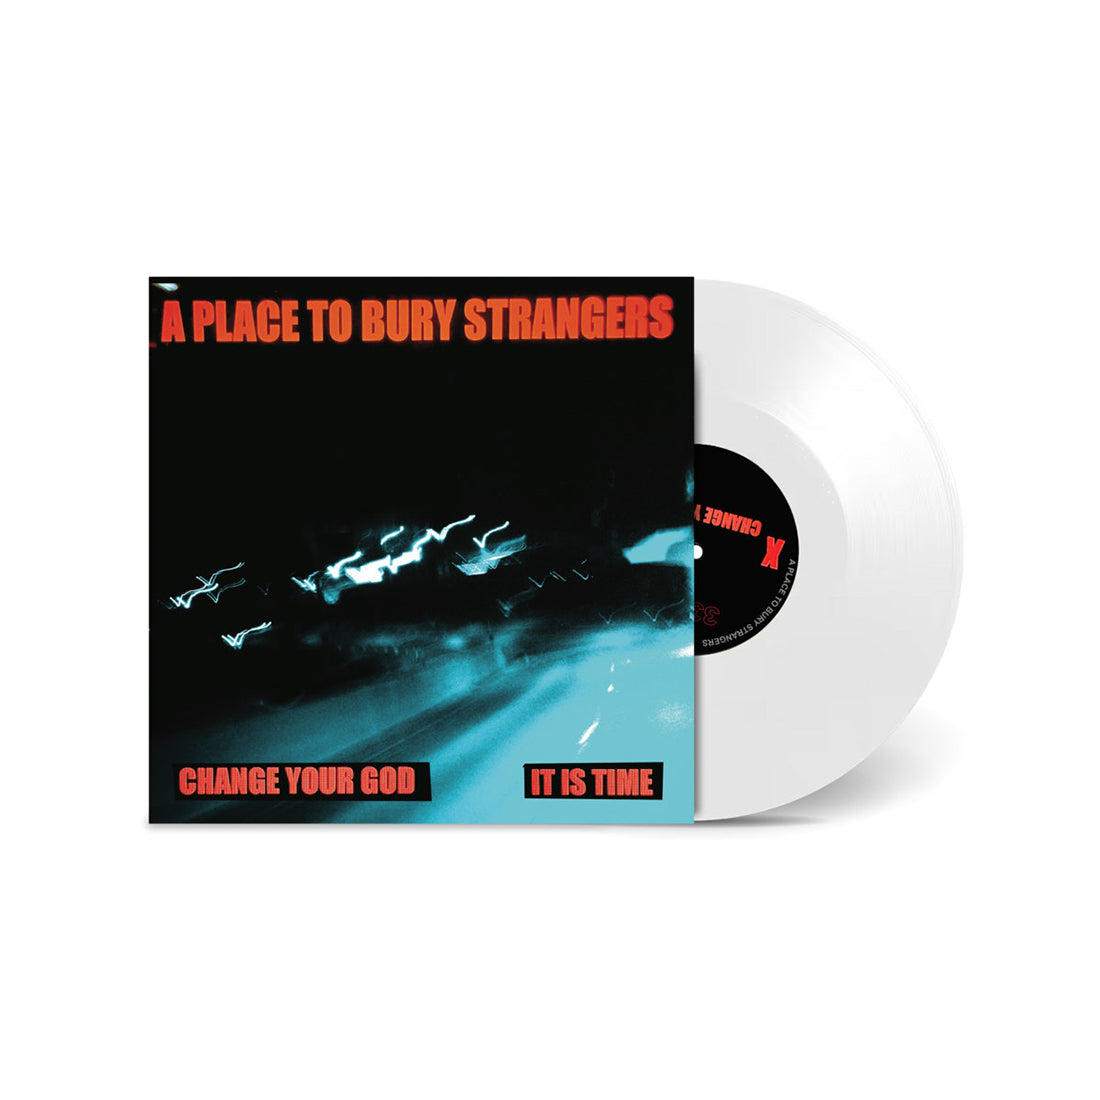 A Place To Bury Strangers - Change Your God/Is It Time: White Vinyl 7" Single